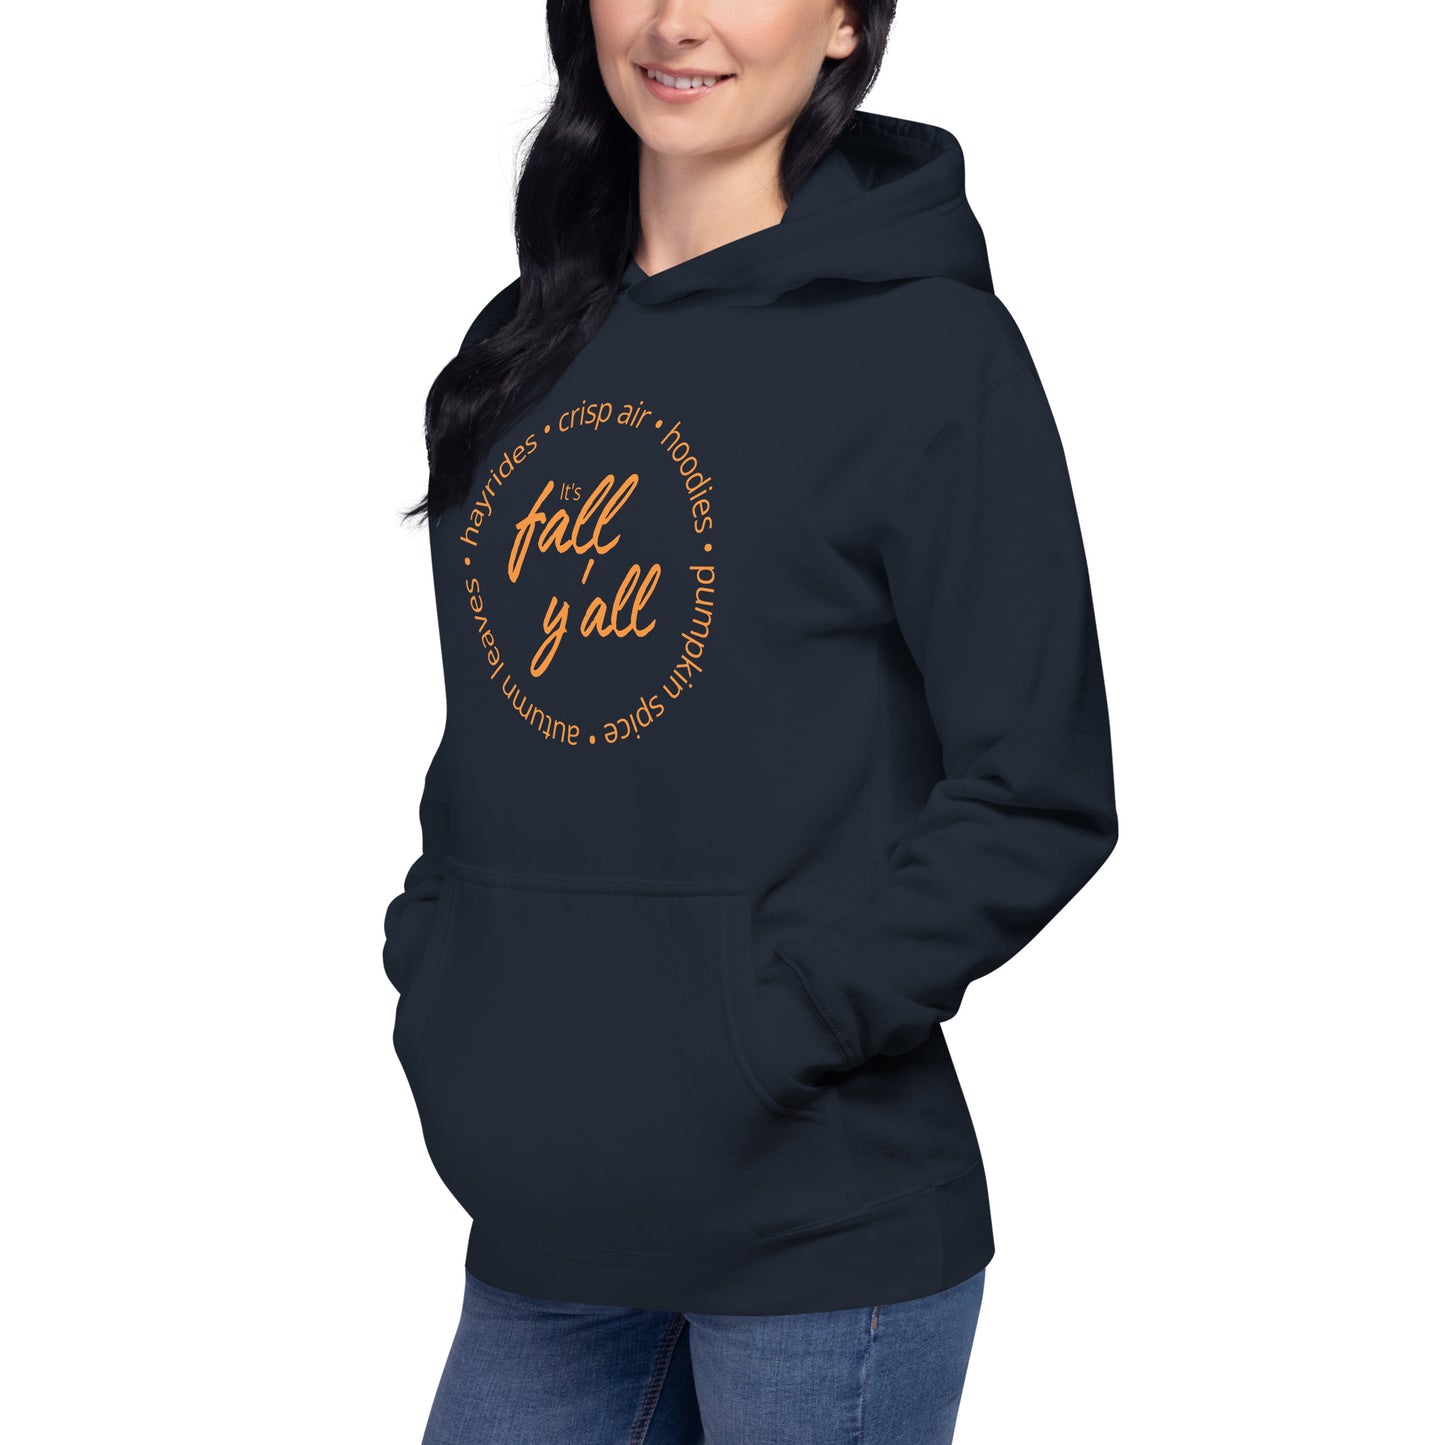 It's Fall Y'all Premium Cotton Hoodie